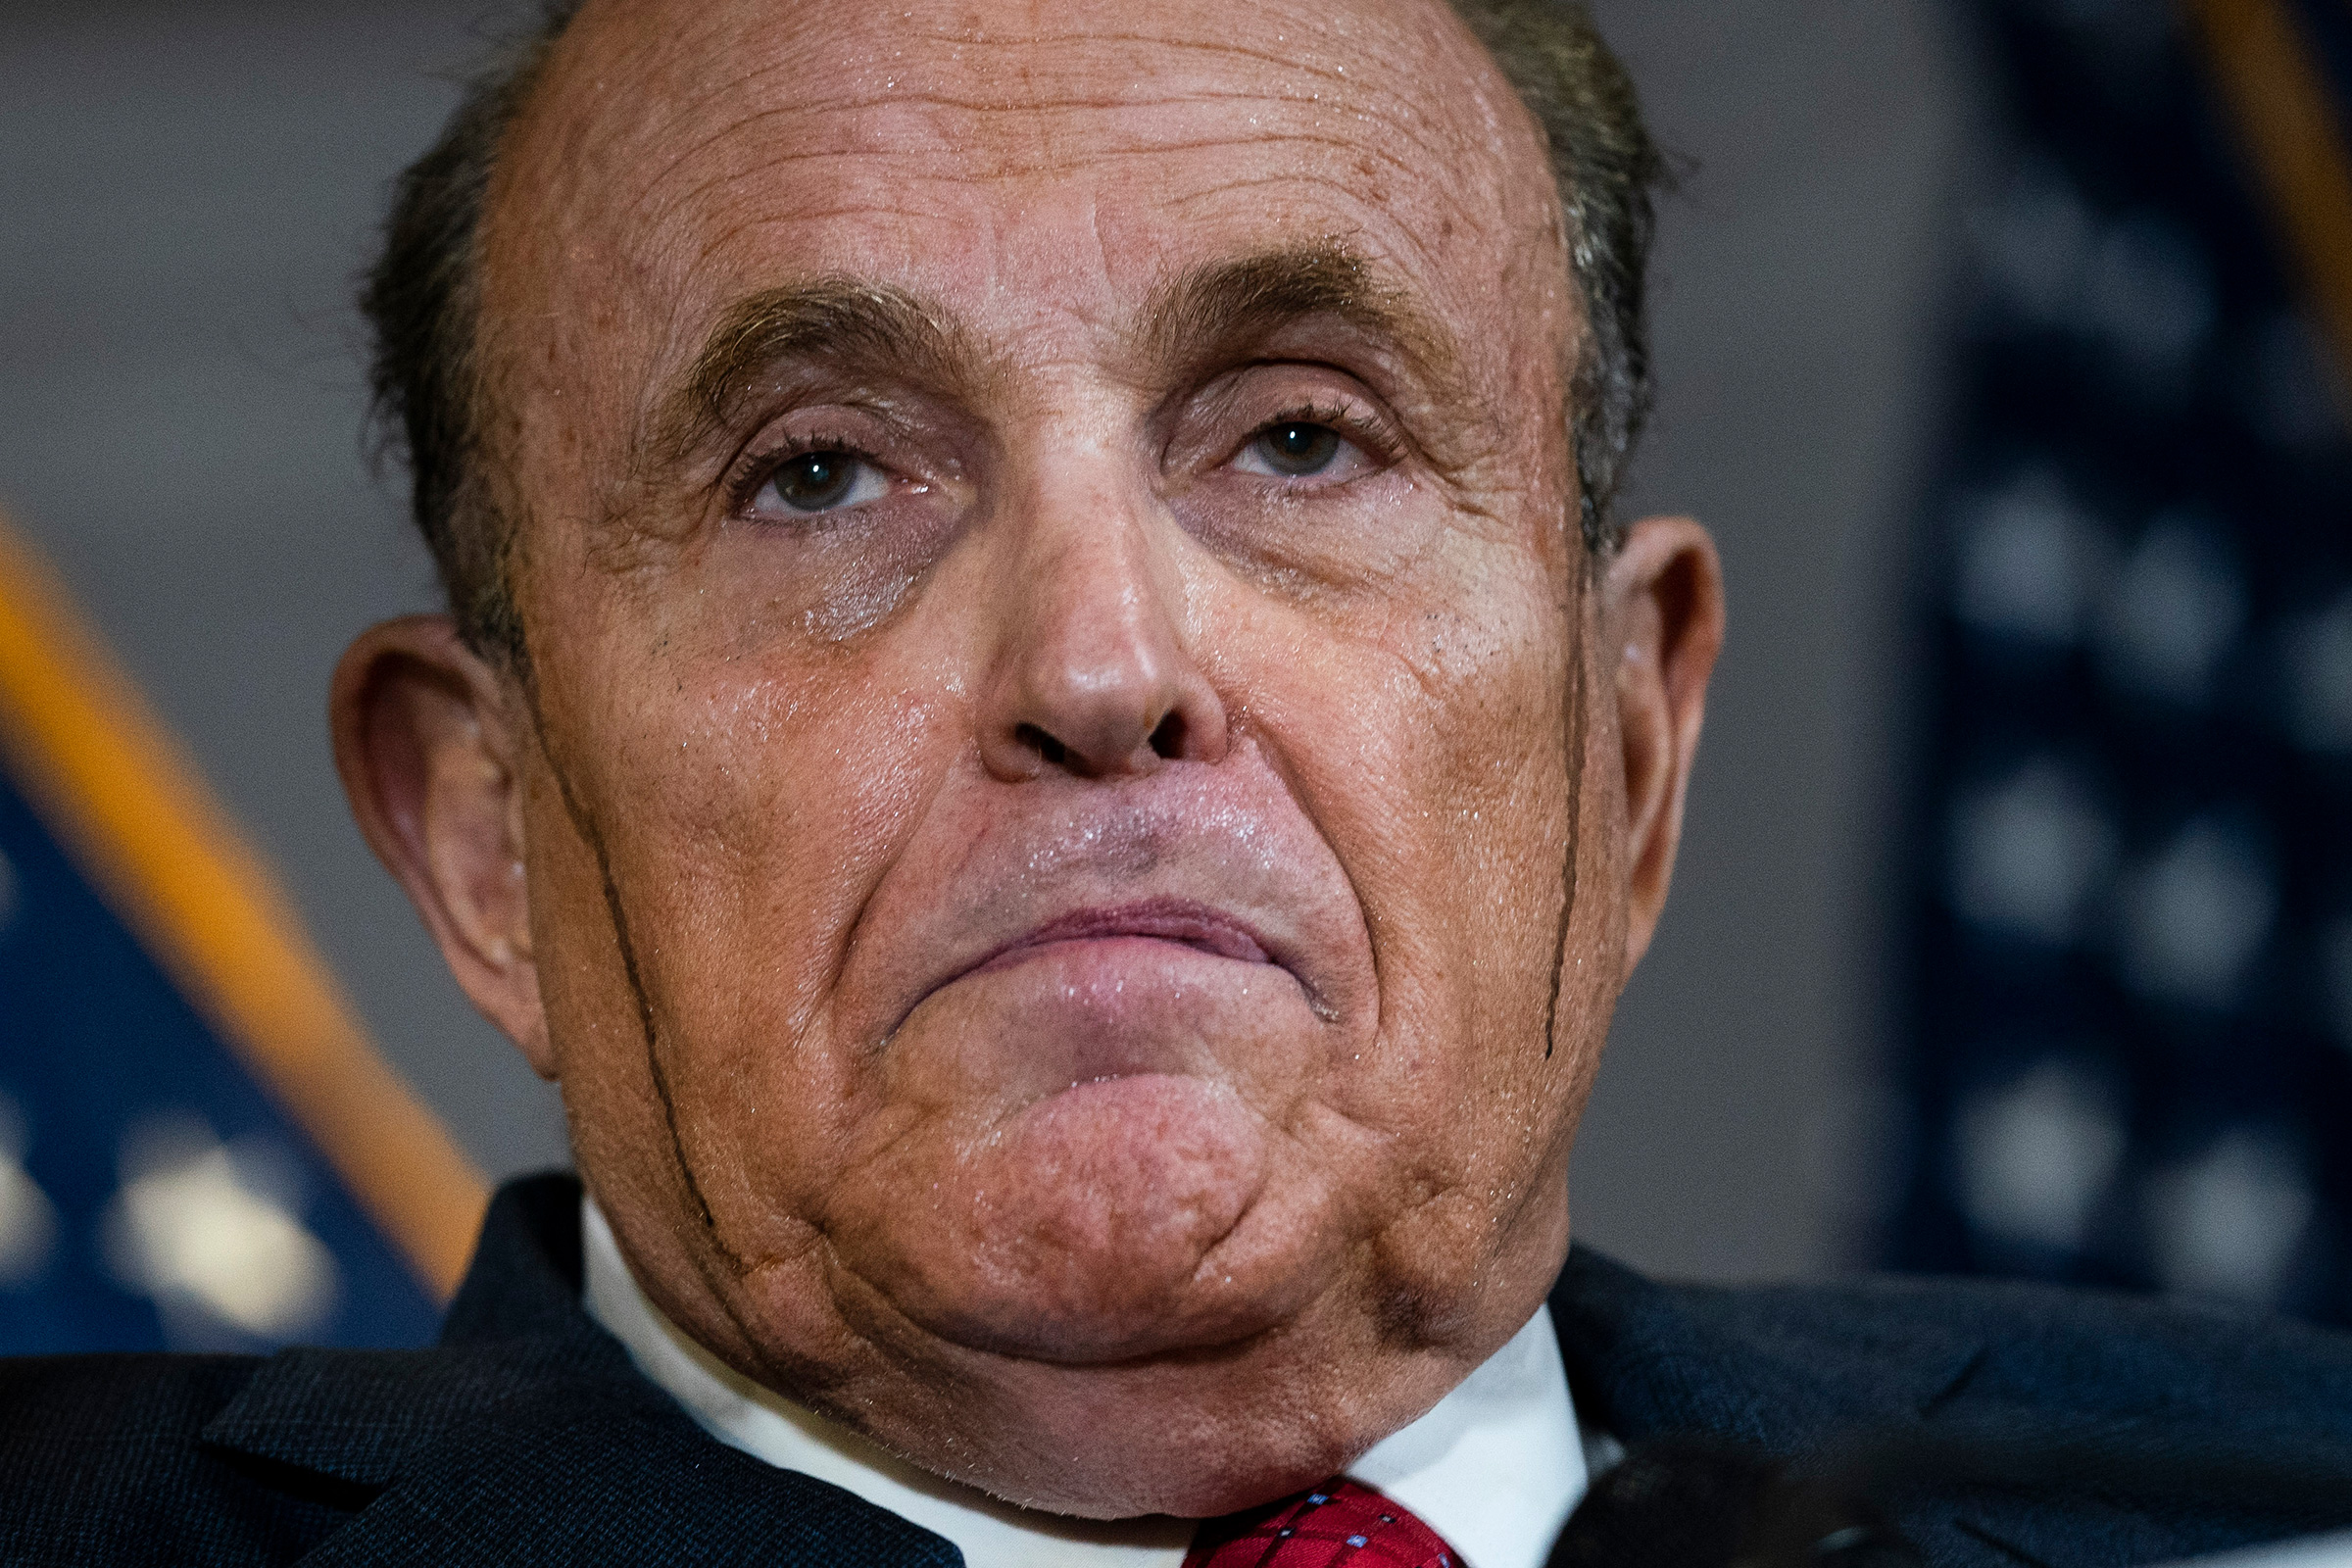 Rudy Giuliani speaks to the press about various lawsuits related to the 2020 election, inside the Republican National Committee headquarters in Washington, D.C., on Nov. 19, 2020. (Drew Angerer—Getty Images)